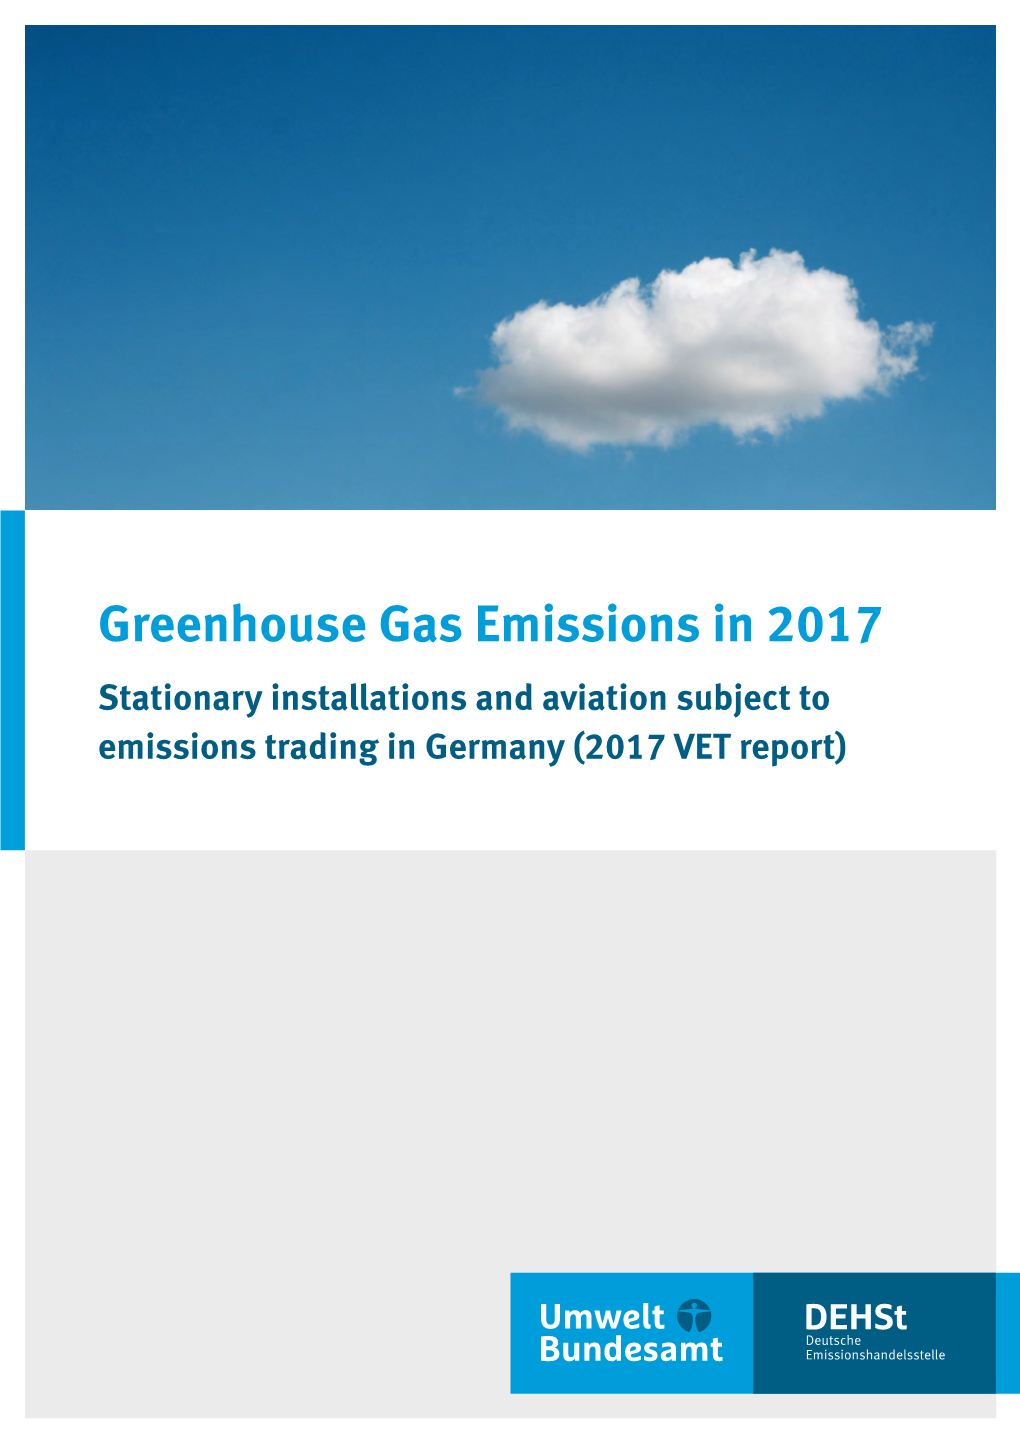 Greenhouse Gas Emissions in 2017: Stationary Installations and Aviation